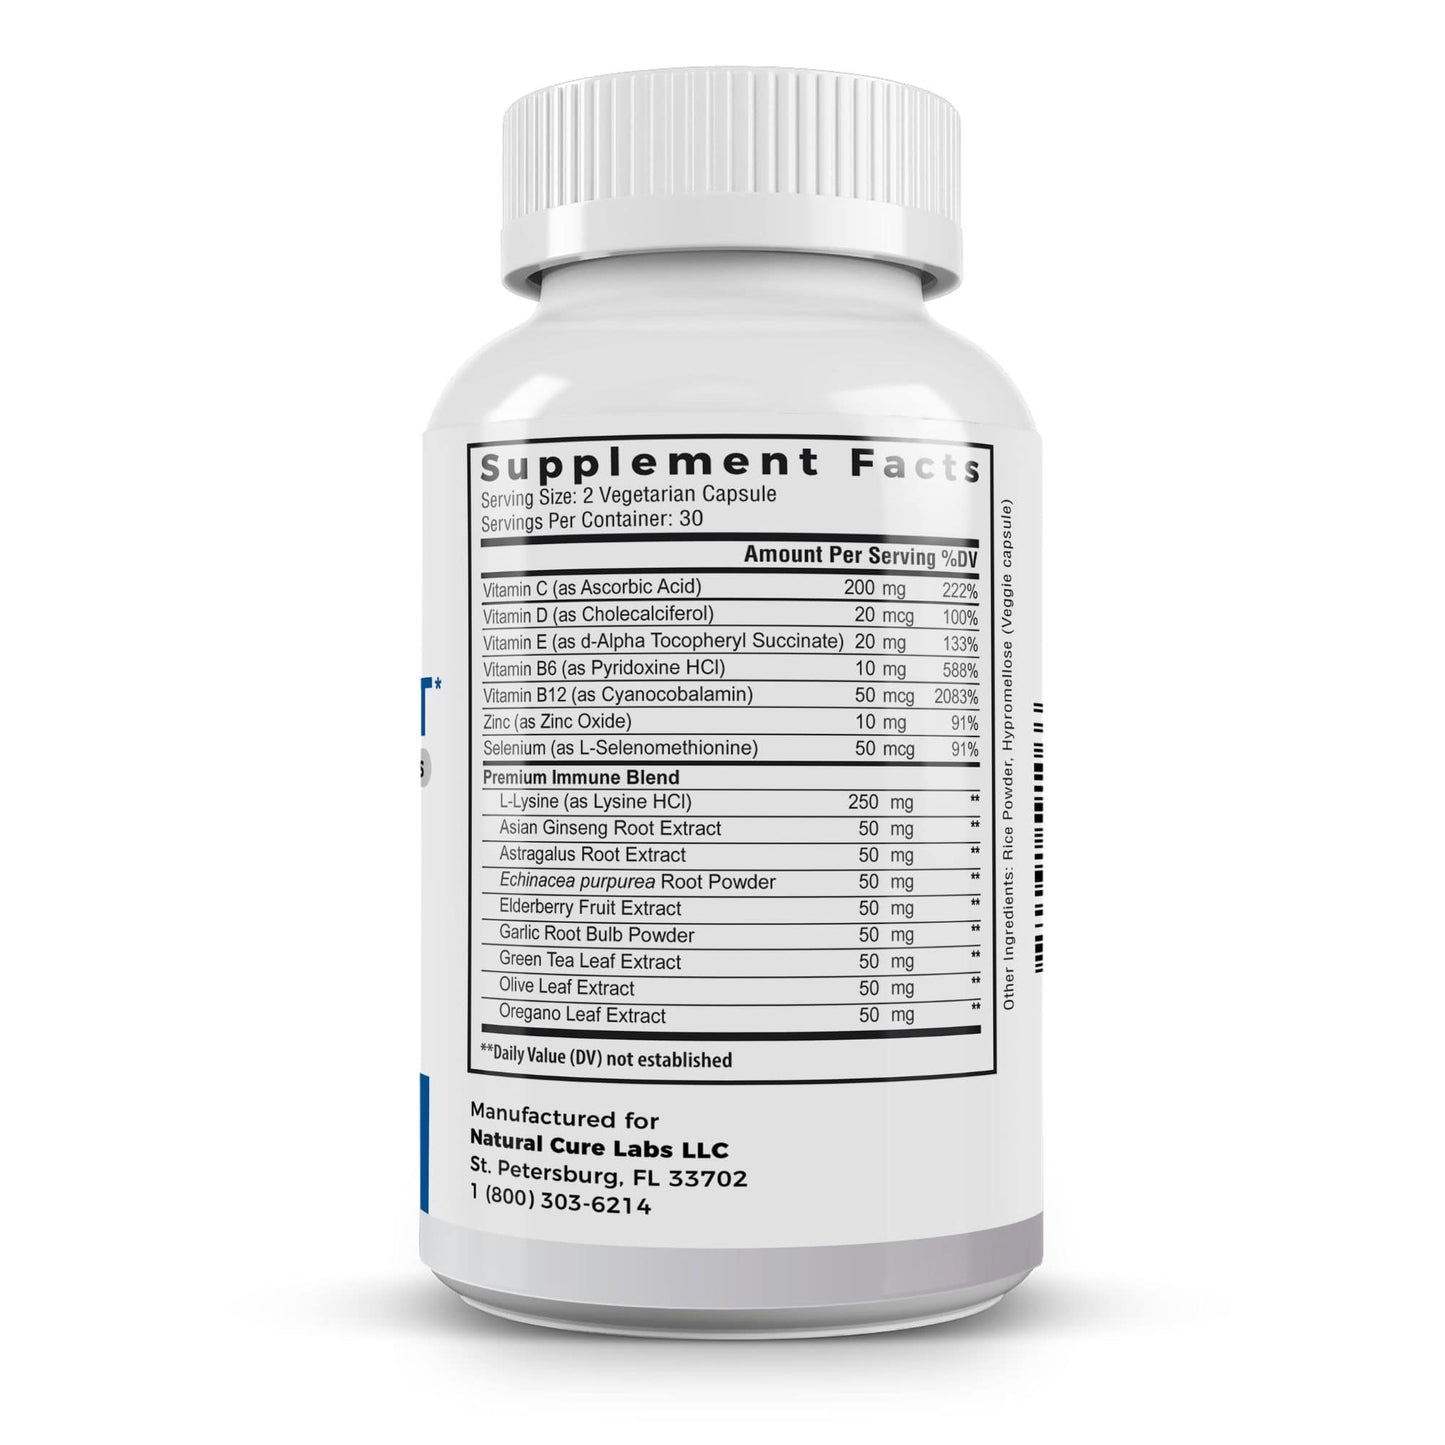 
                  
                    The label on Natural Cure Labs Premium Immune Support supplement provides a detailed list of its comprehensive 16 ingredient blend. With vitamins C, D, E, B6, B12, selenium, and a premium immune blend including L-Lysine, this vegetarian capsule formulation is designed to bolster immune function, as indicated by the supplement facts on the label.
                  
                